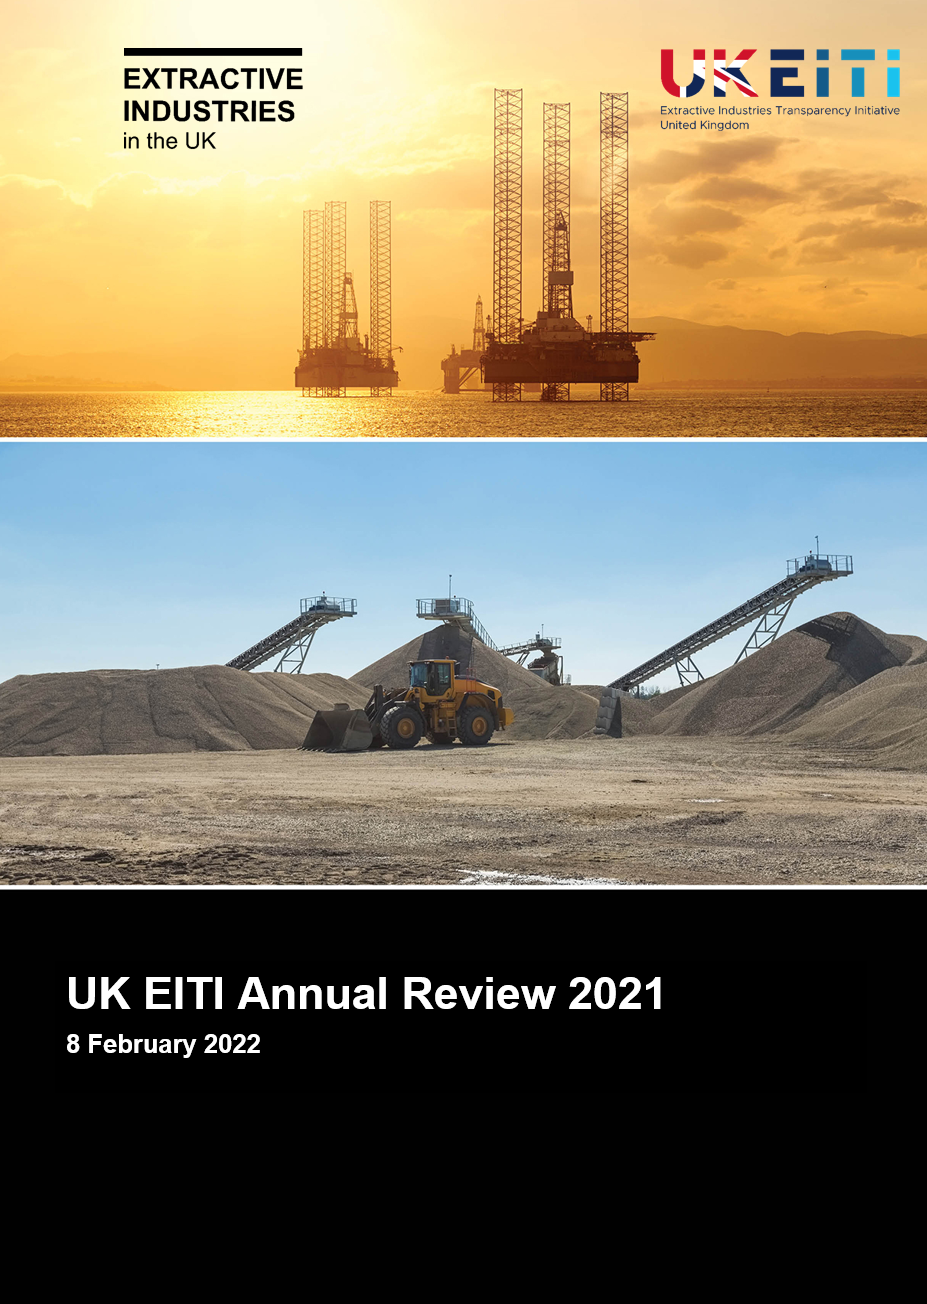 UK EITI Annual Review cover